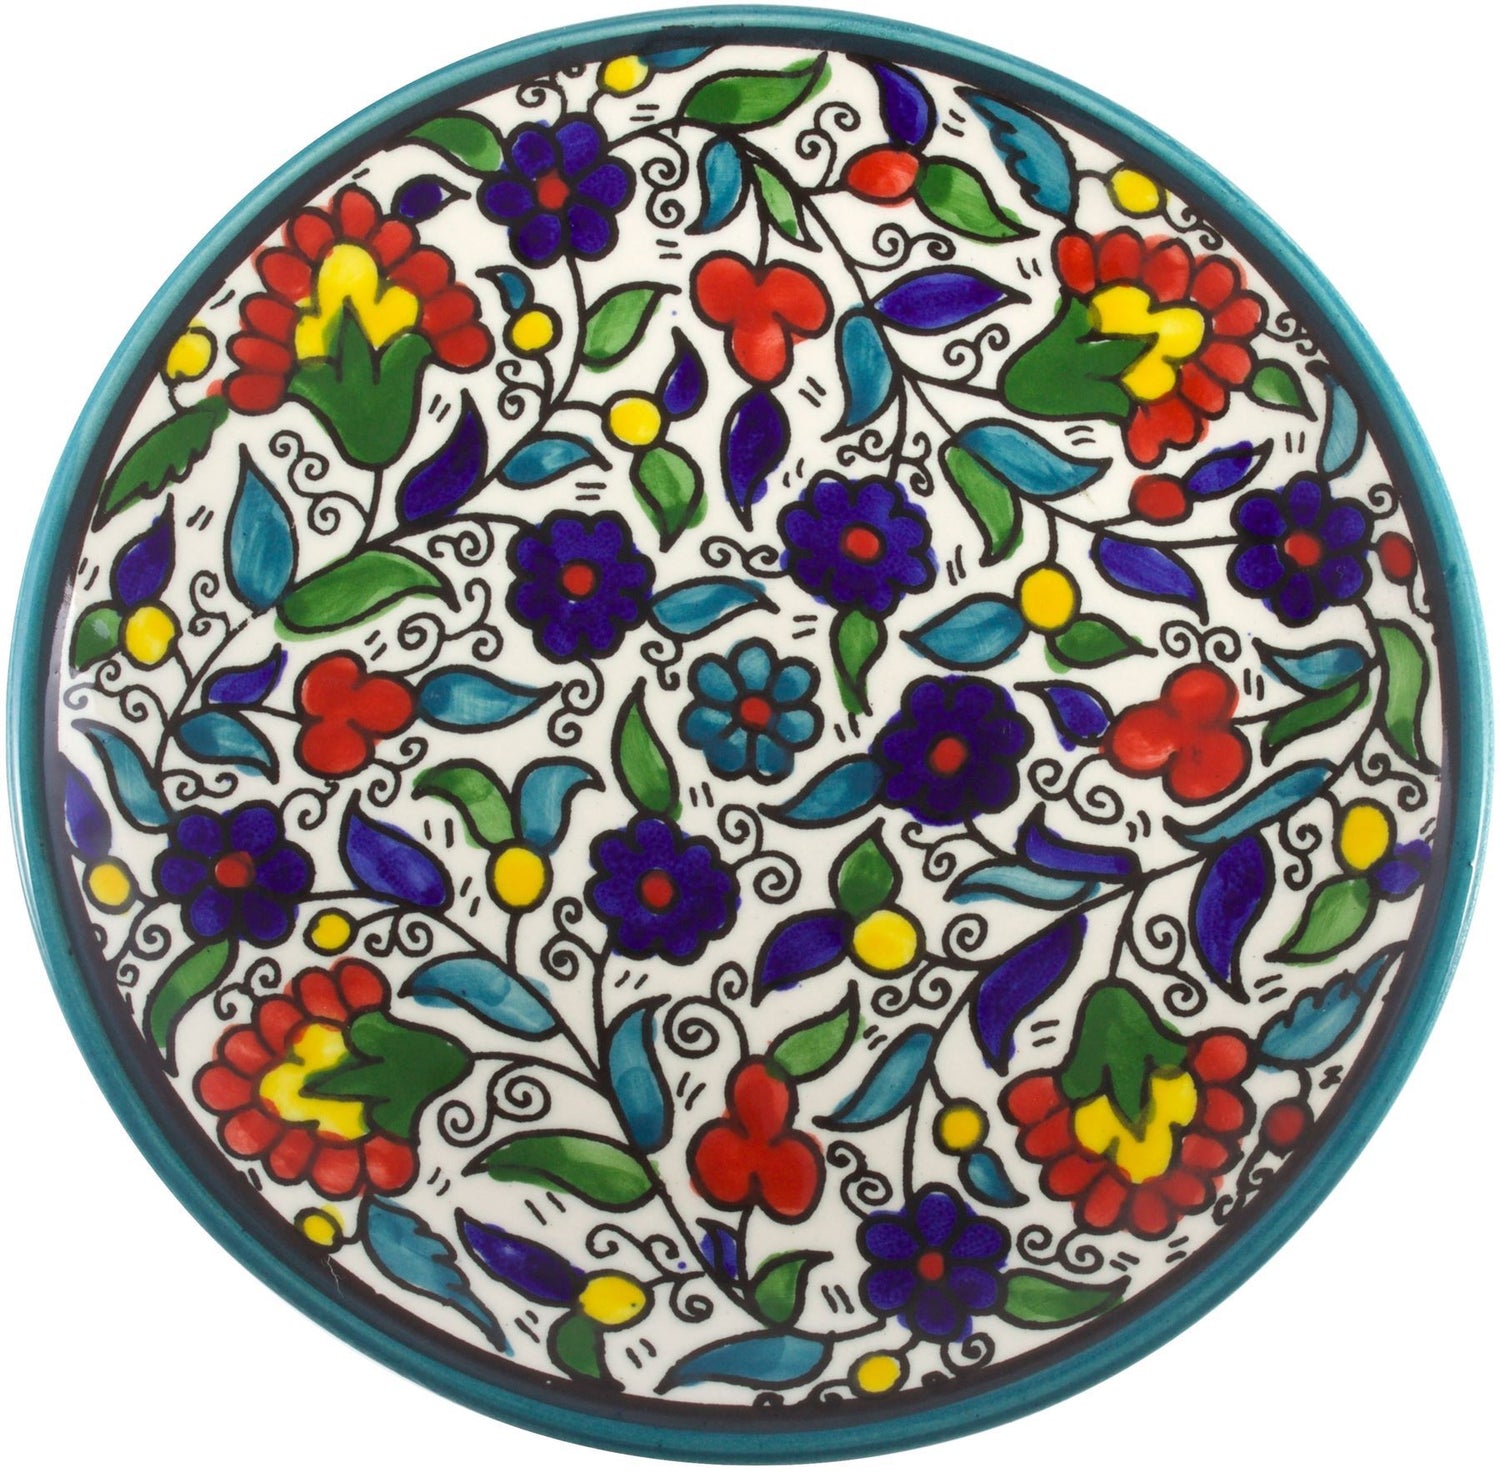 Bluenoemi Jewelry bowl 14 cm / Flowers Armenian handcrafted ceramic bowl for serving or decoration.